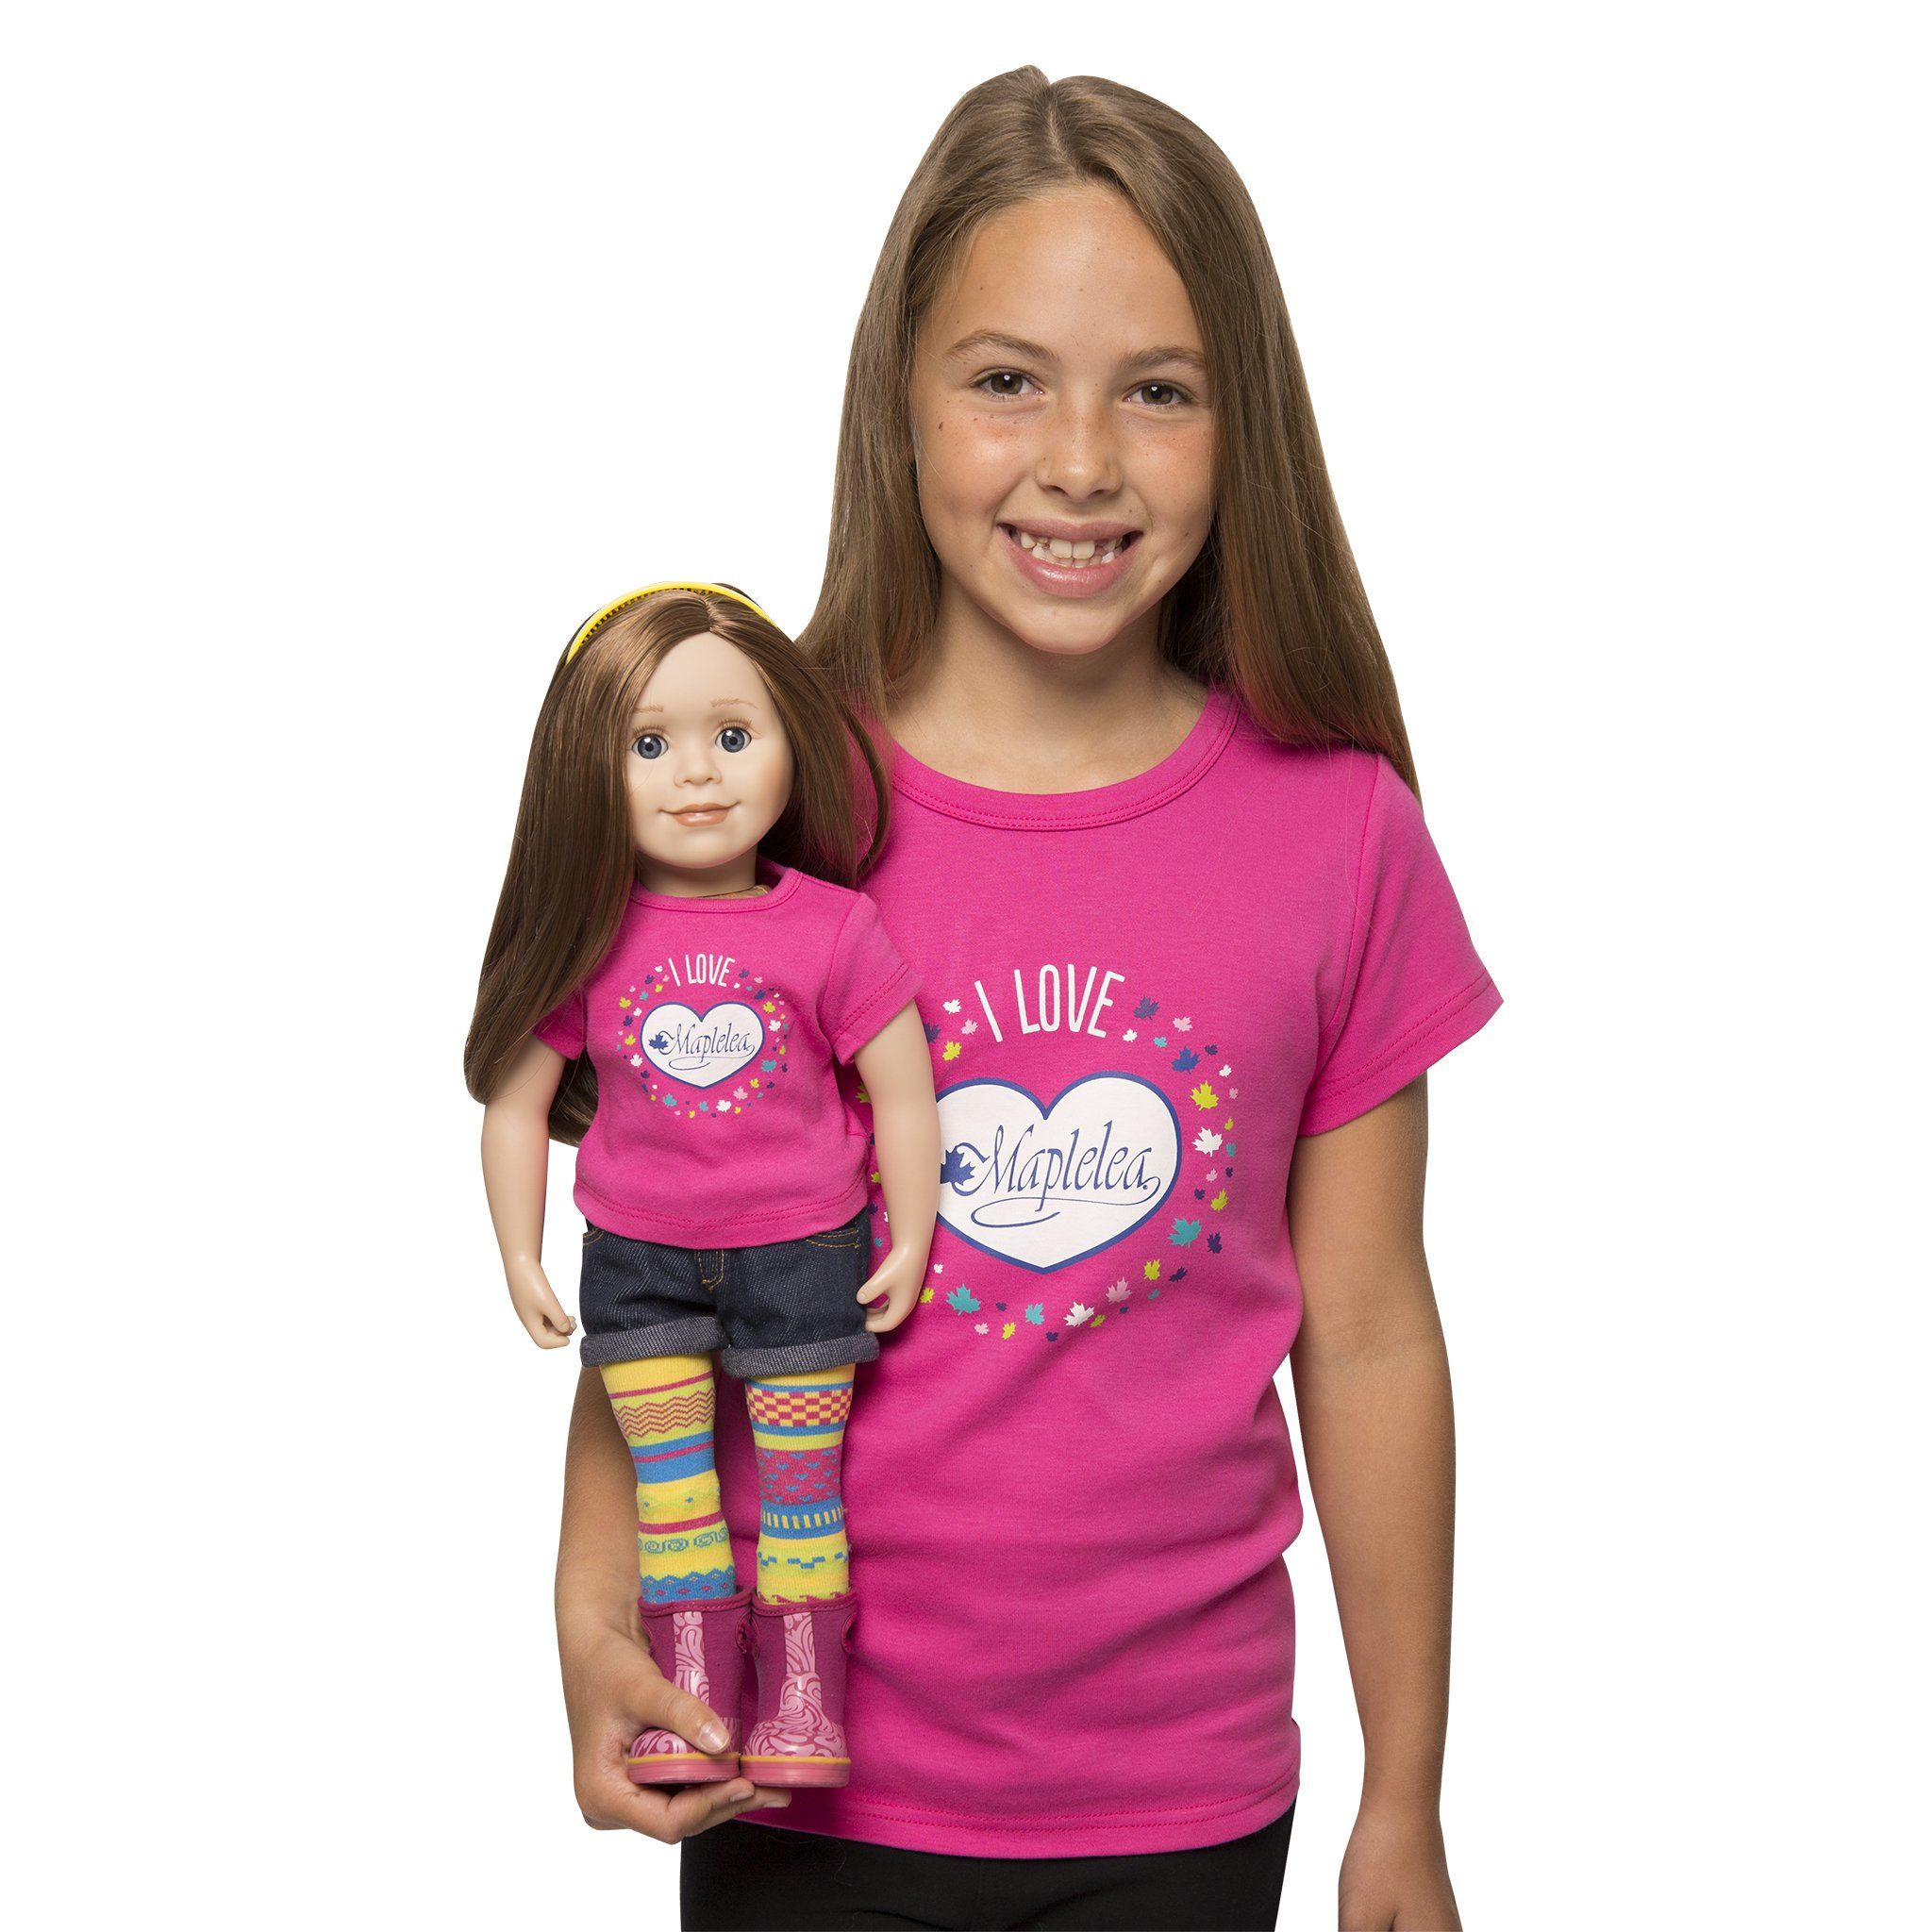 I Heart Maplelea Shirt For Dolls Km910 All Dolls Dress Alike Outfits And Accessories